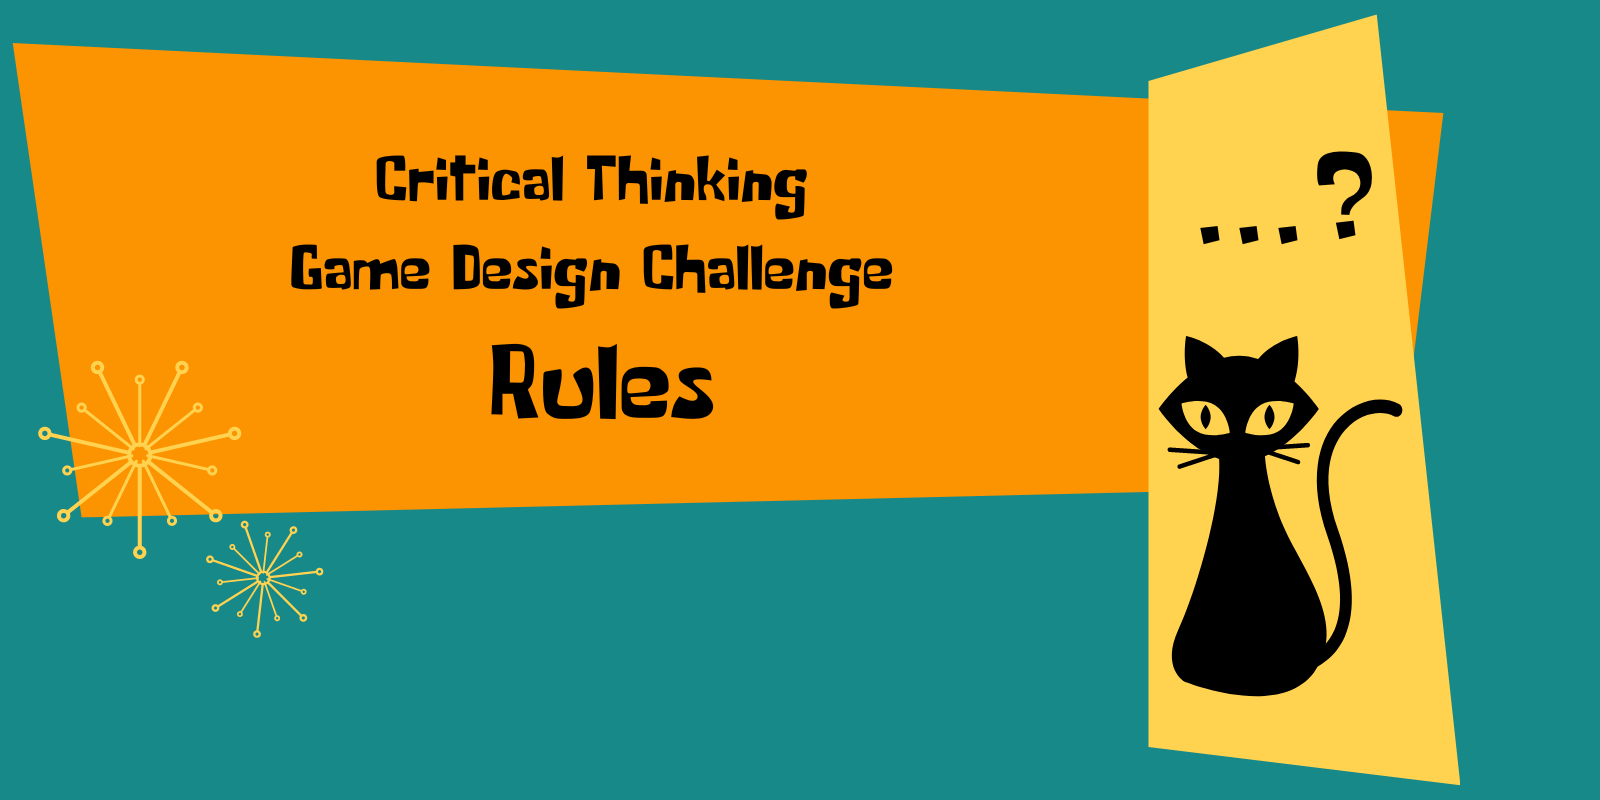 Critical Thinking Cat is thinking about the rules for the Critical Thinking Game Design Challenge.